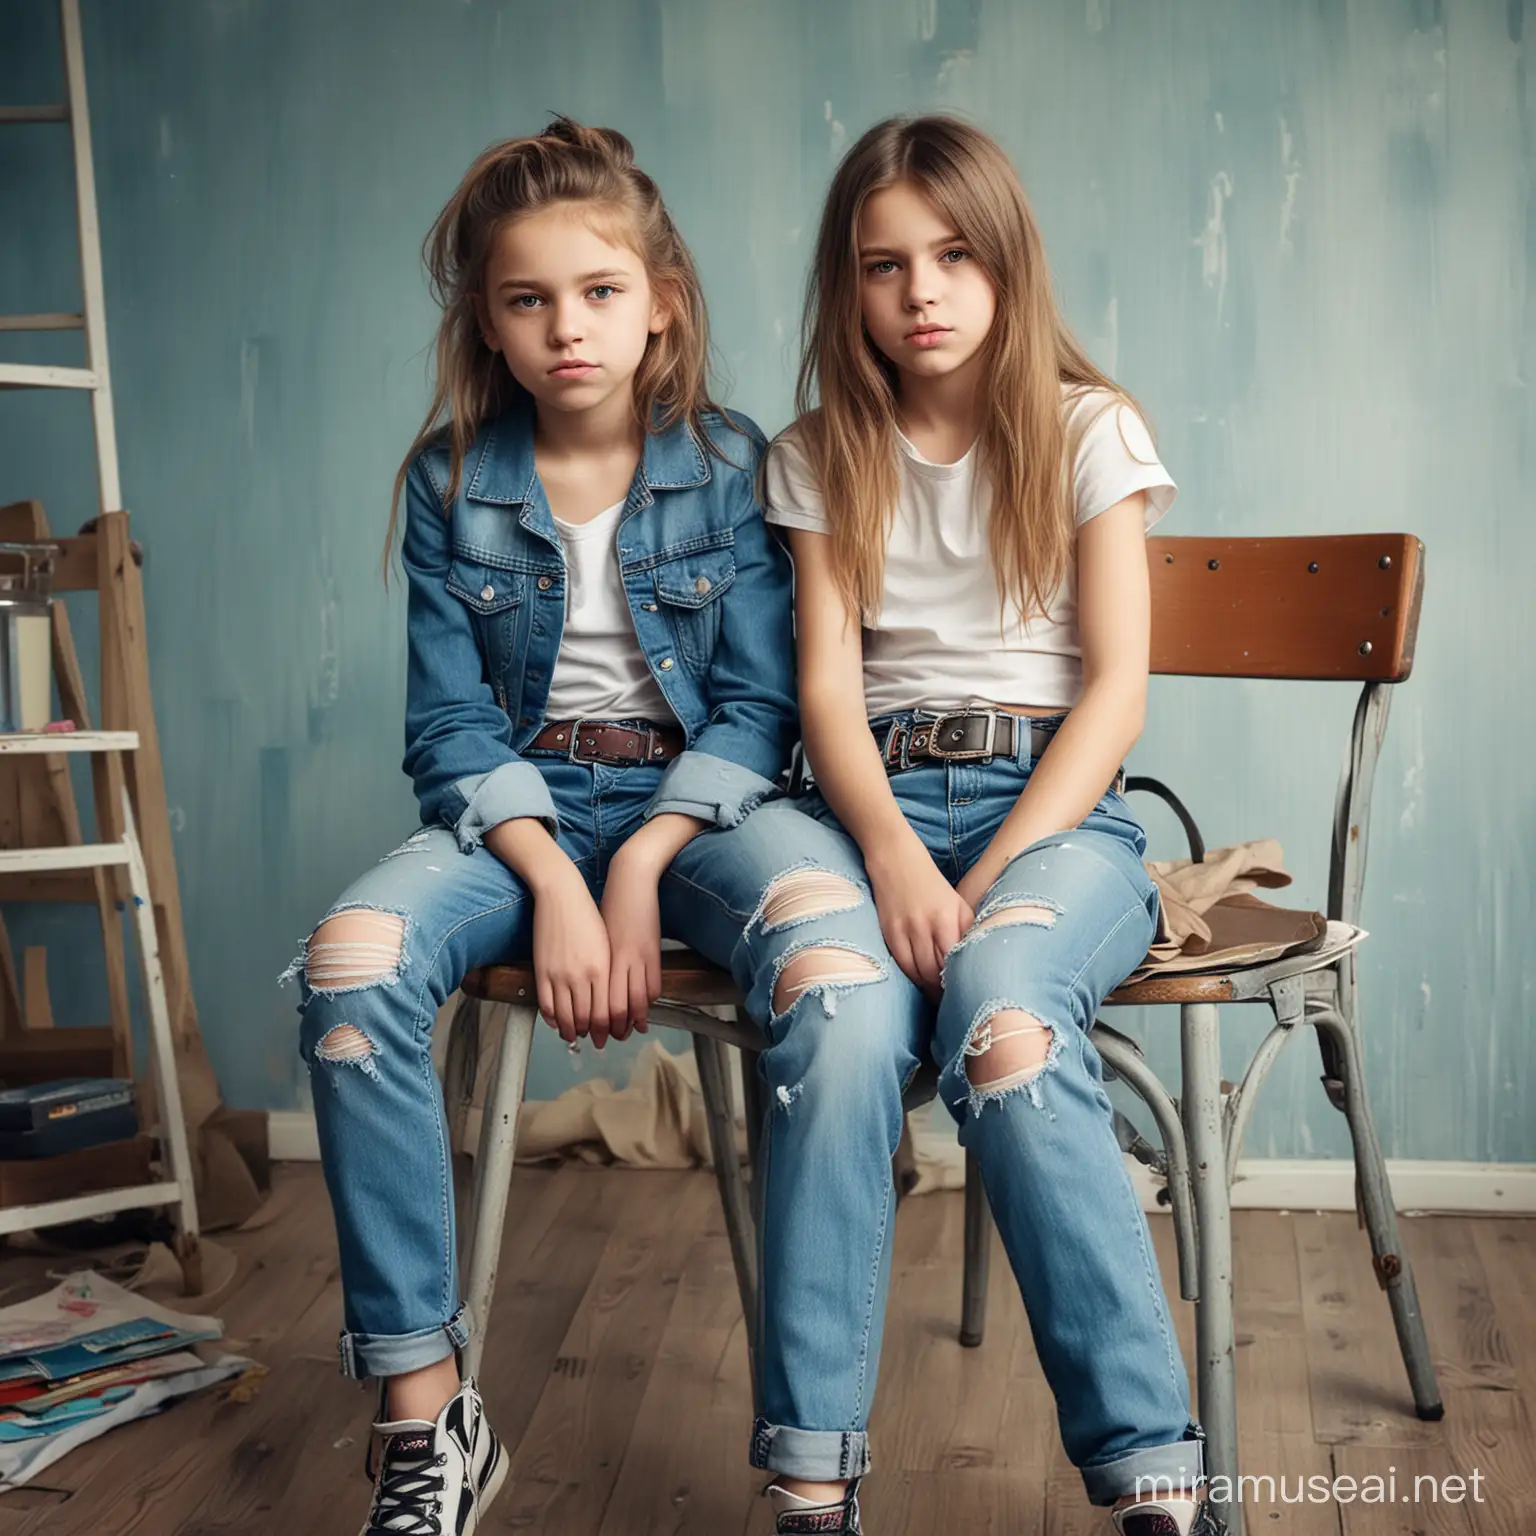 real photo of two ugly girls,13 years,sitting on a chair,stern face,skinny blue faded jeans with belt,messy children's room,extremely realistic,skin features